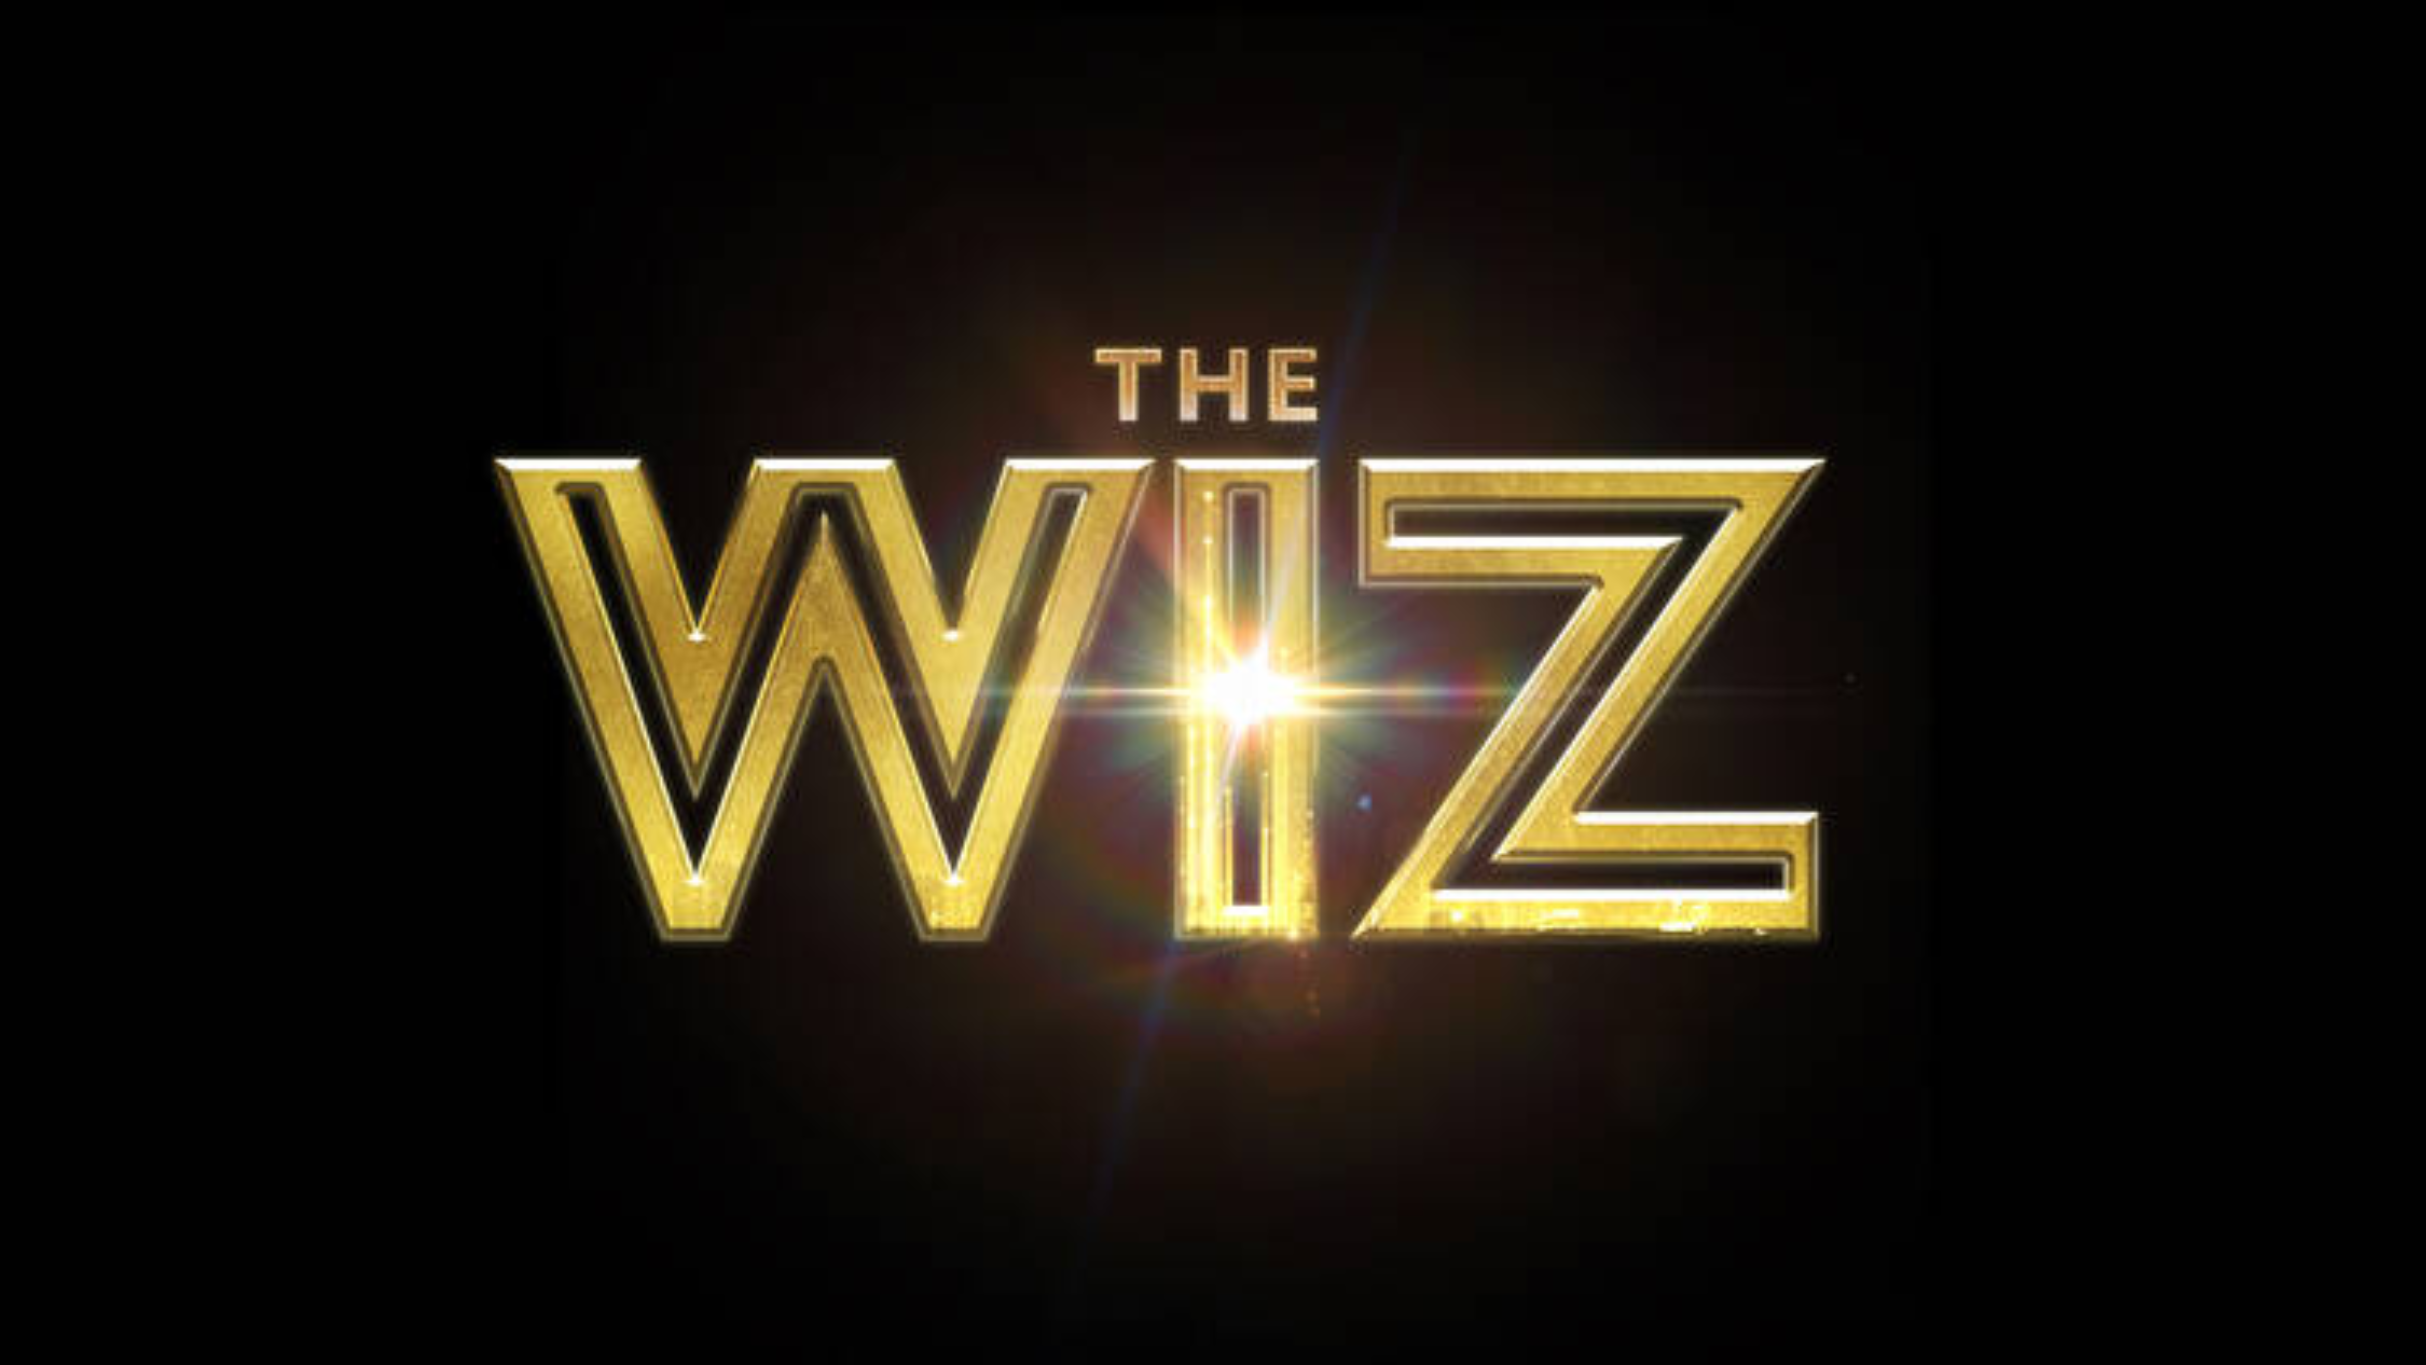 The Wiz (Chicago) in Chicago promo photo for Internet presale offer code